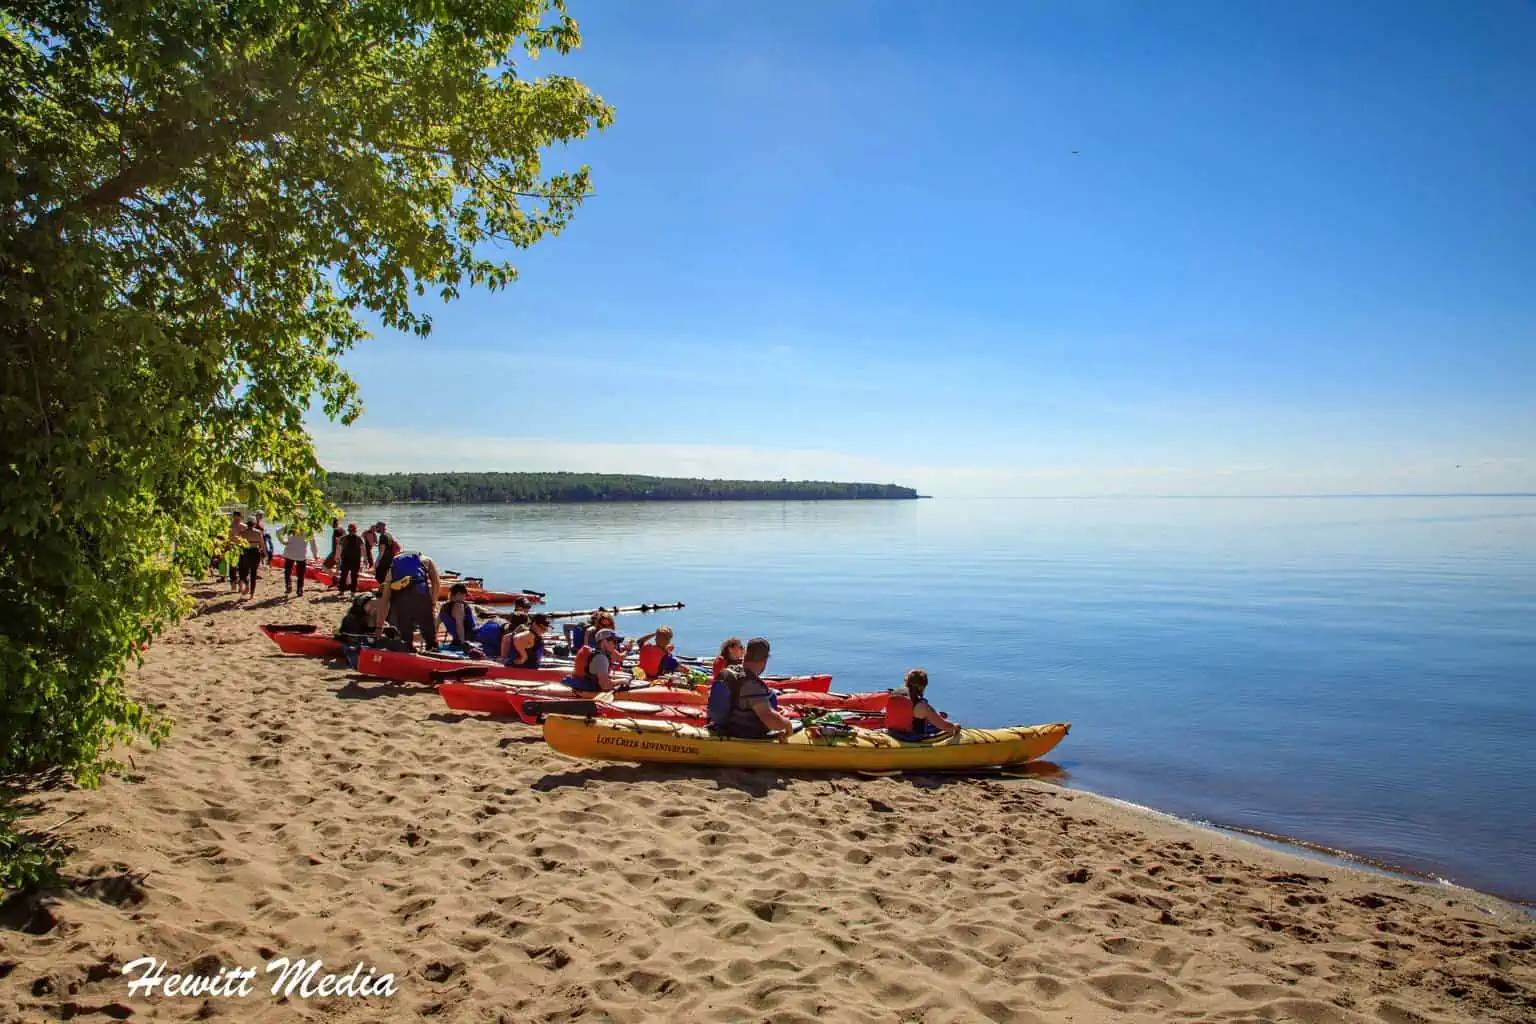 Trip to the Apostle Islands